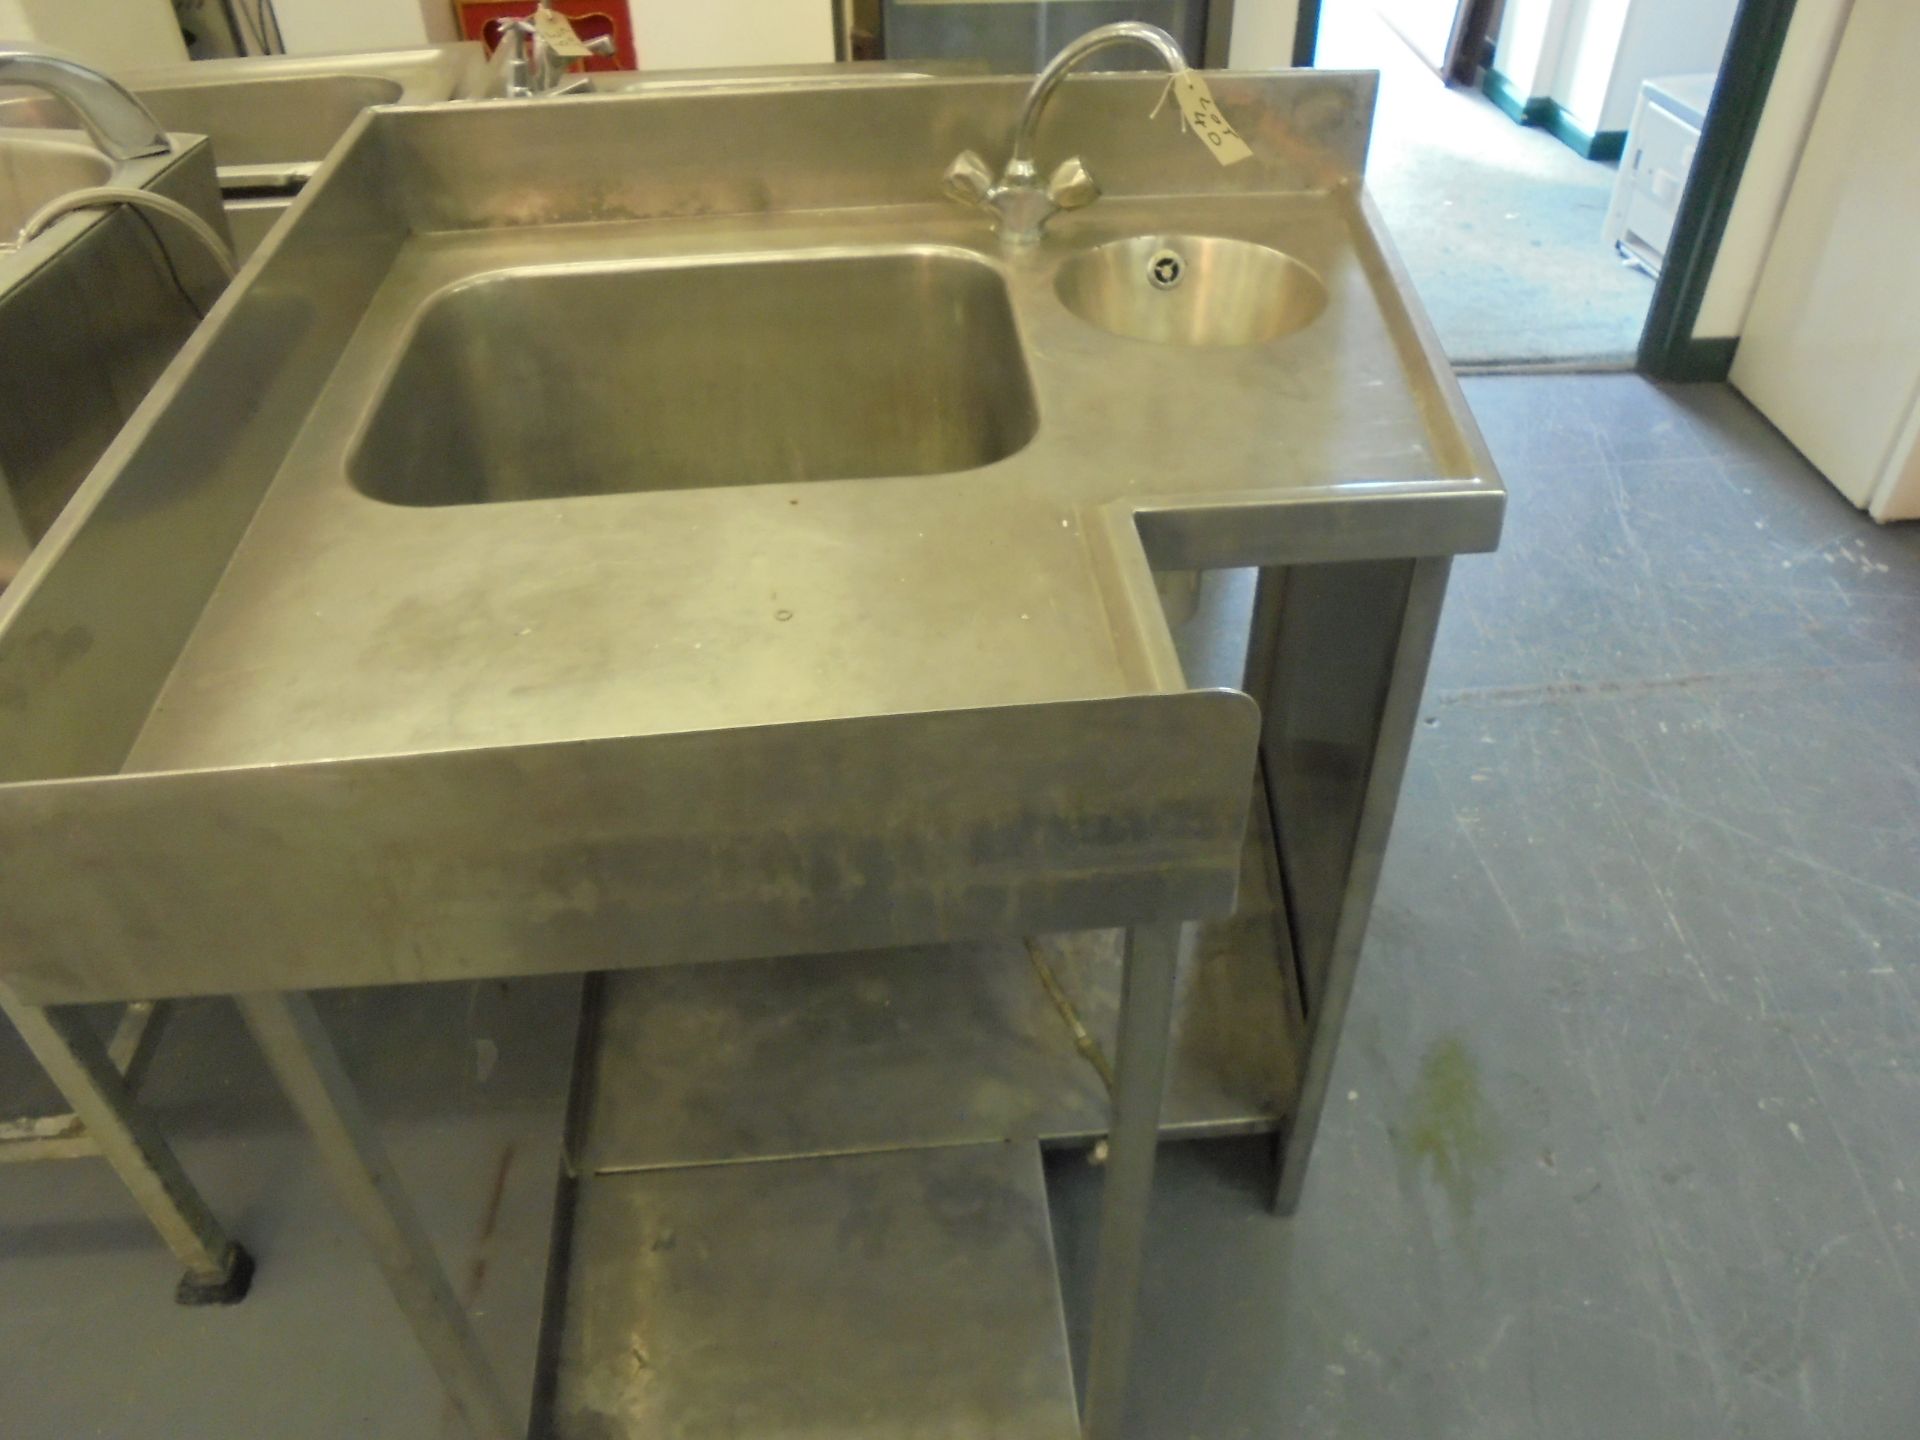 Stainless Steel Commercial Corner Single Bowl Sink with Hand Basin & Shelf Under. Size (H) 90cm x ( - Image 2 of 3